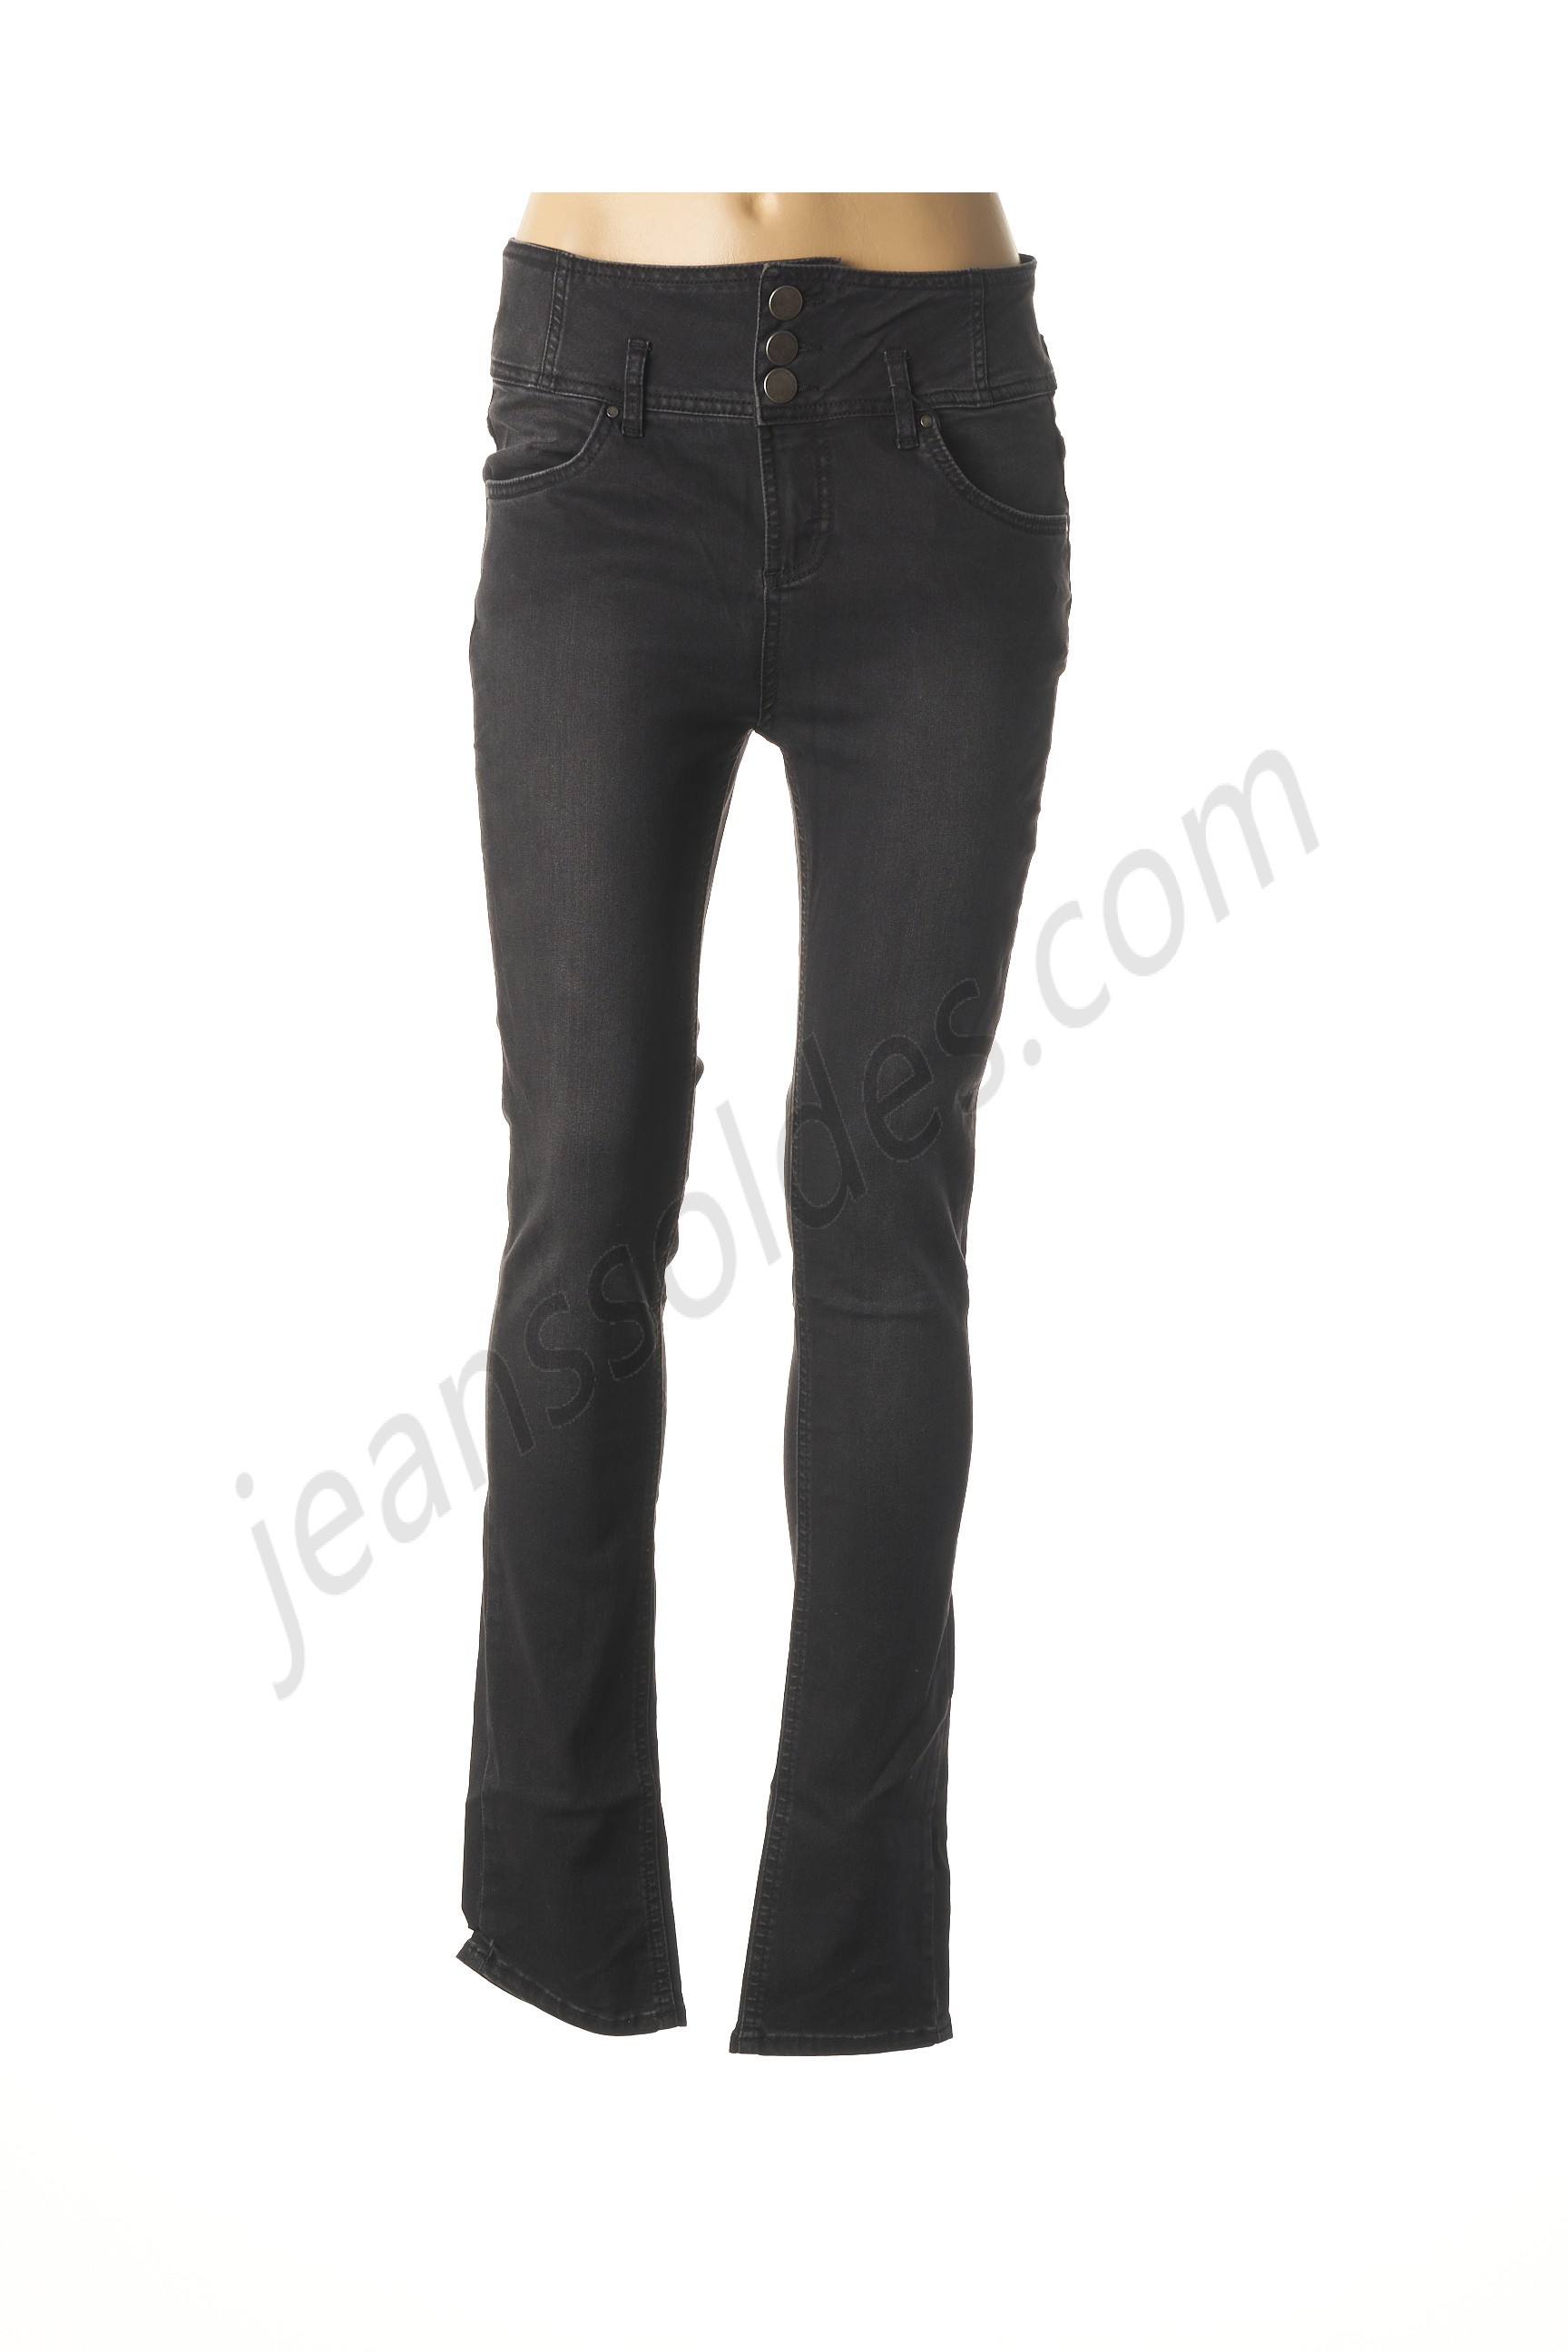 b.young-Jeans coupe slim prix d’amis - b.young-Jeans coupe slim prix d’amis